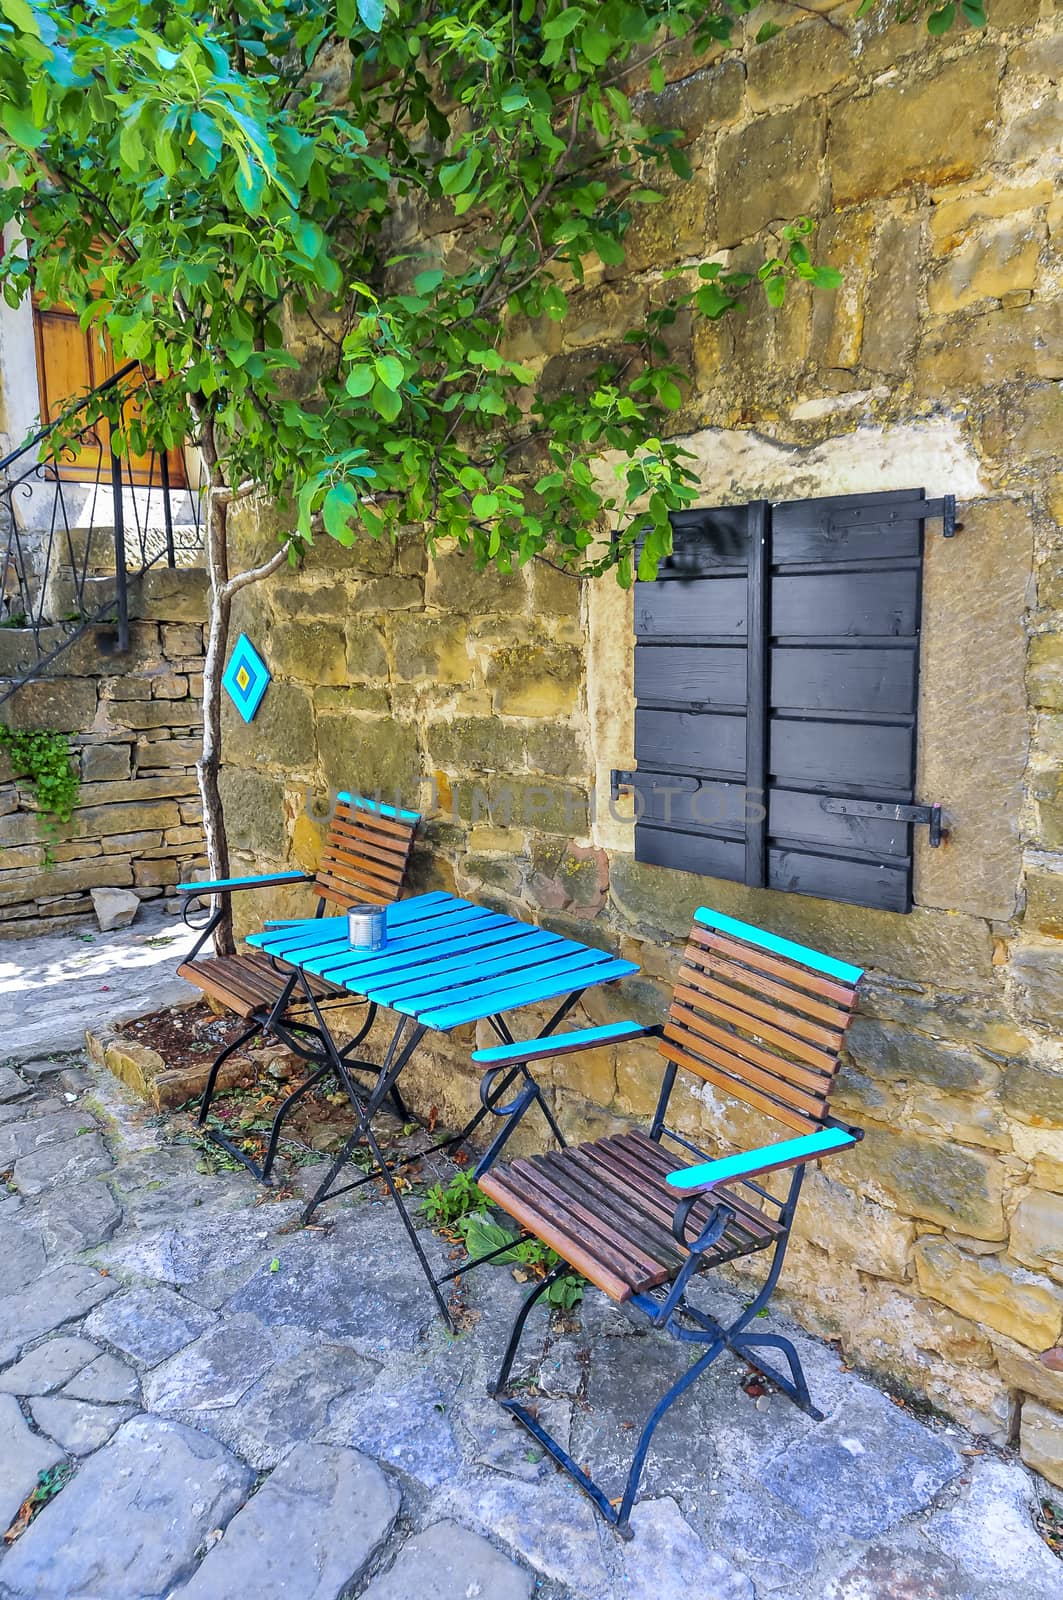 A pair of turquise chairs and a table in an idylic instrian village in the shade of an old stone house